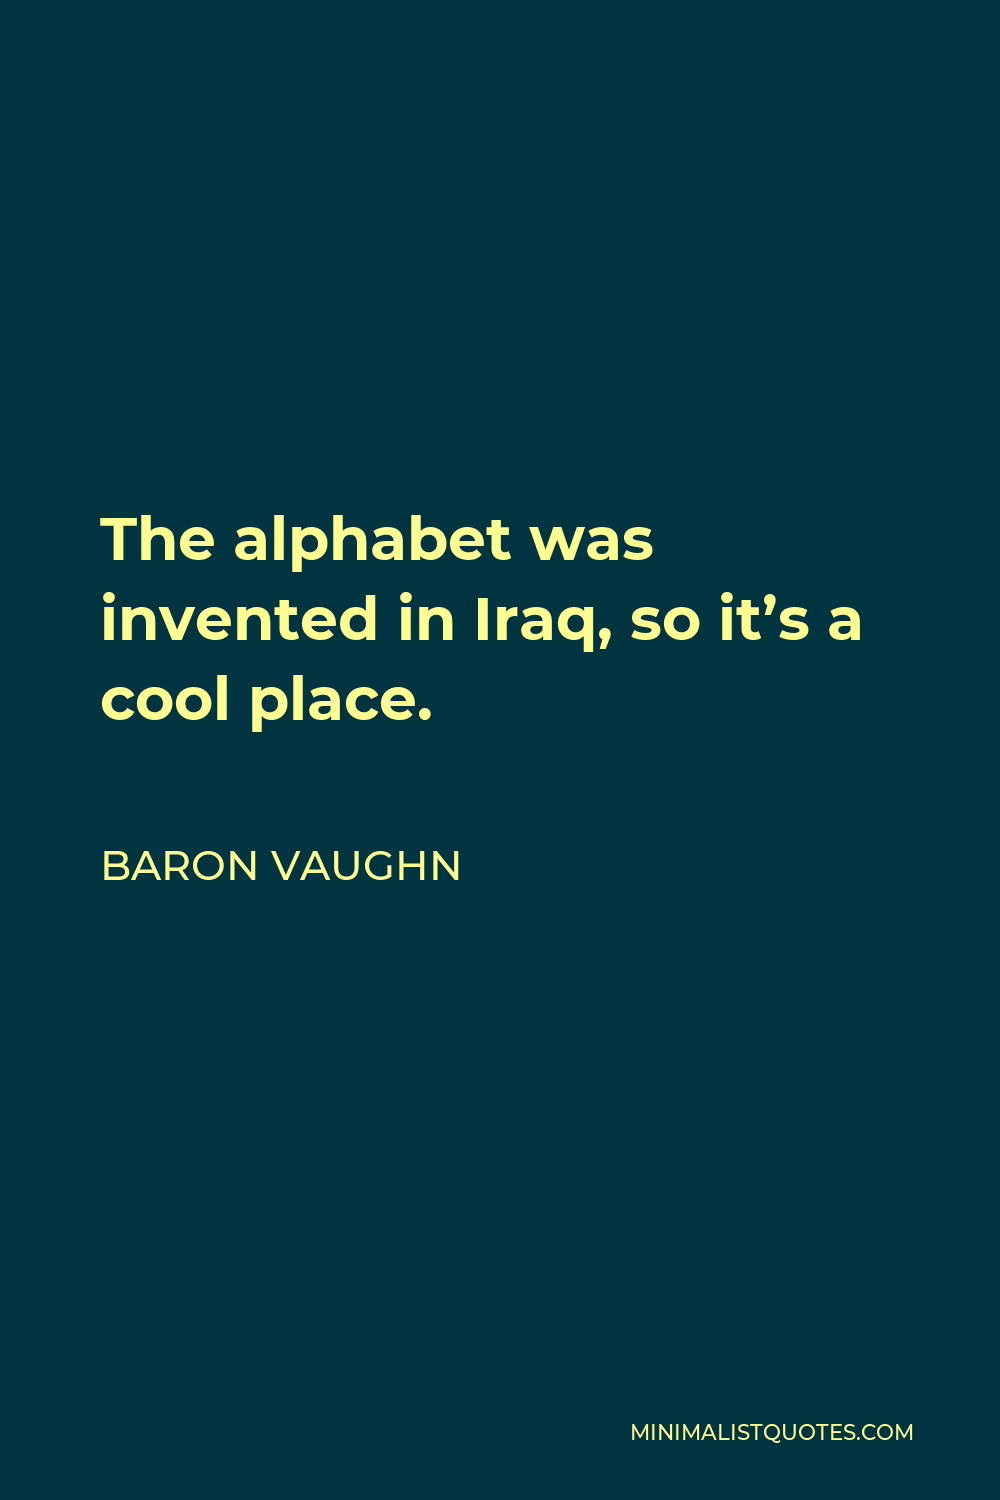 Baron Vaughn Quote - The alphabet was invented in Iraq, so it’s a cool place.